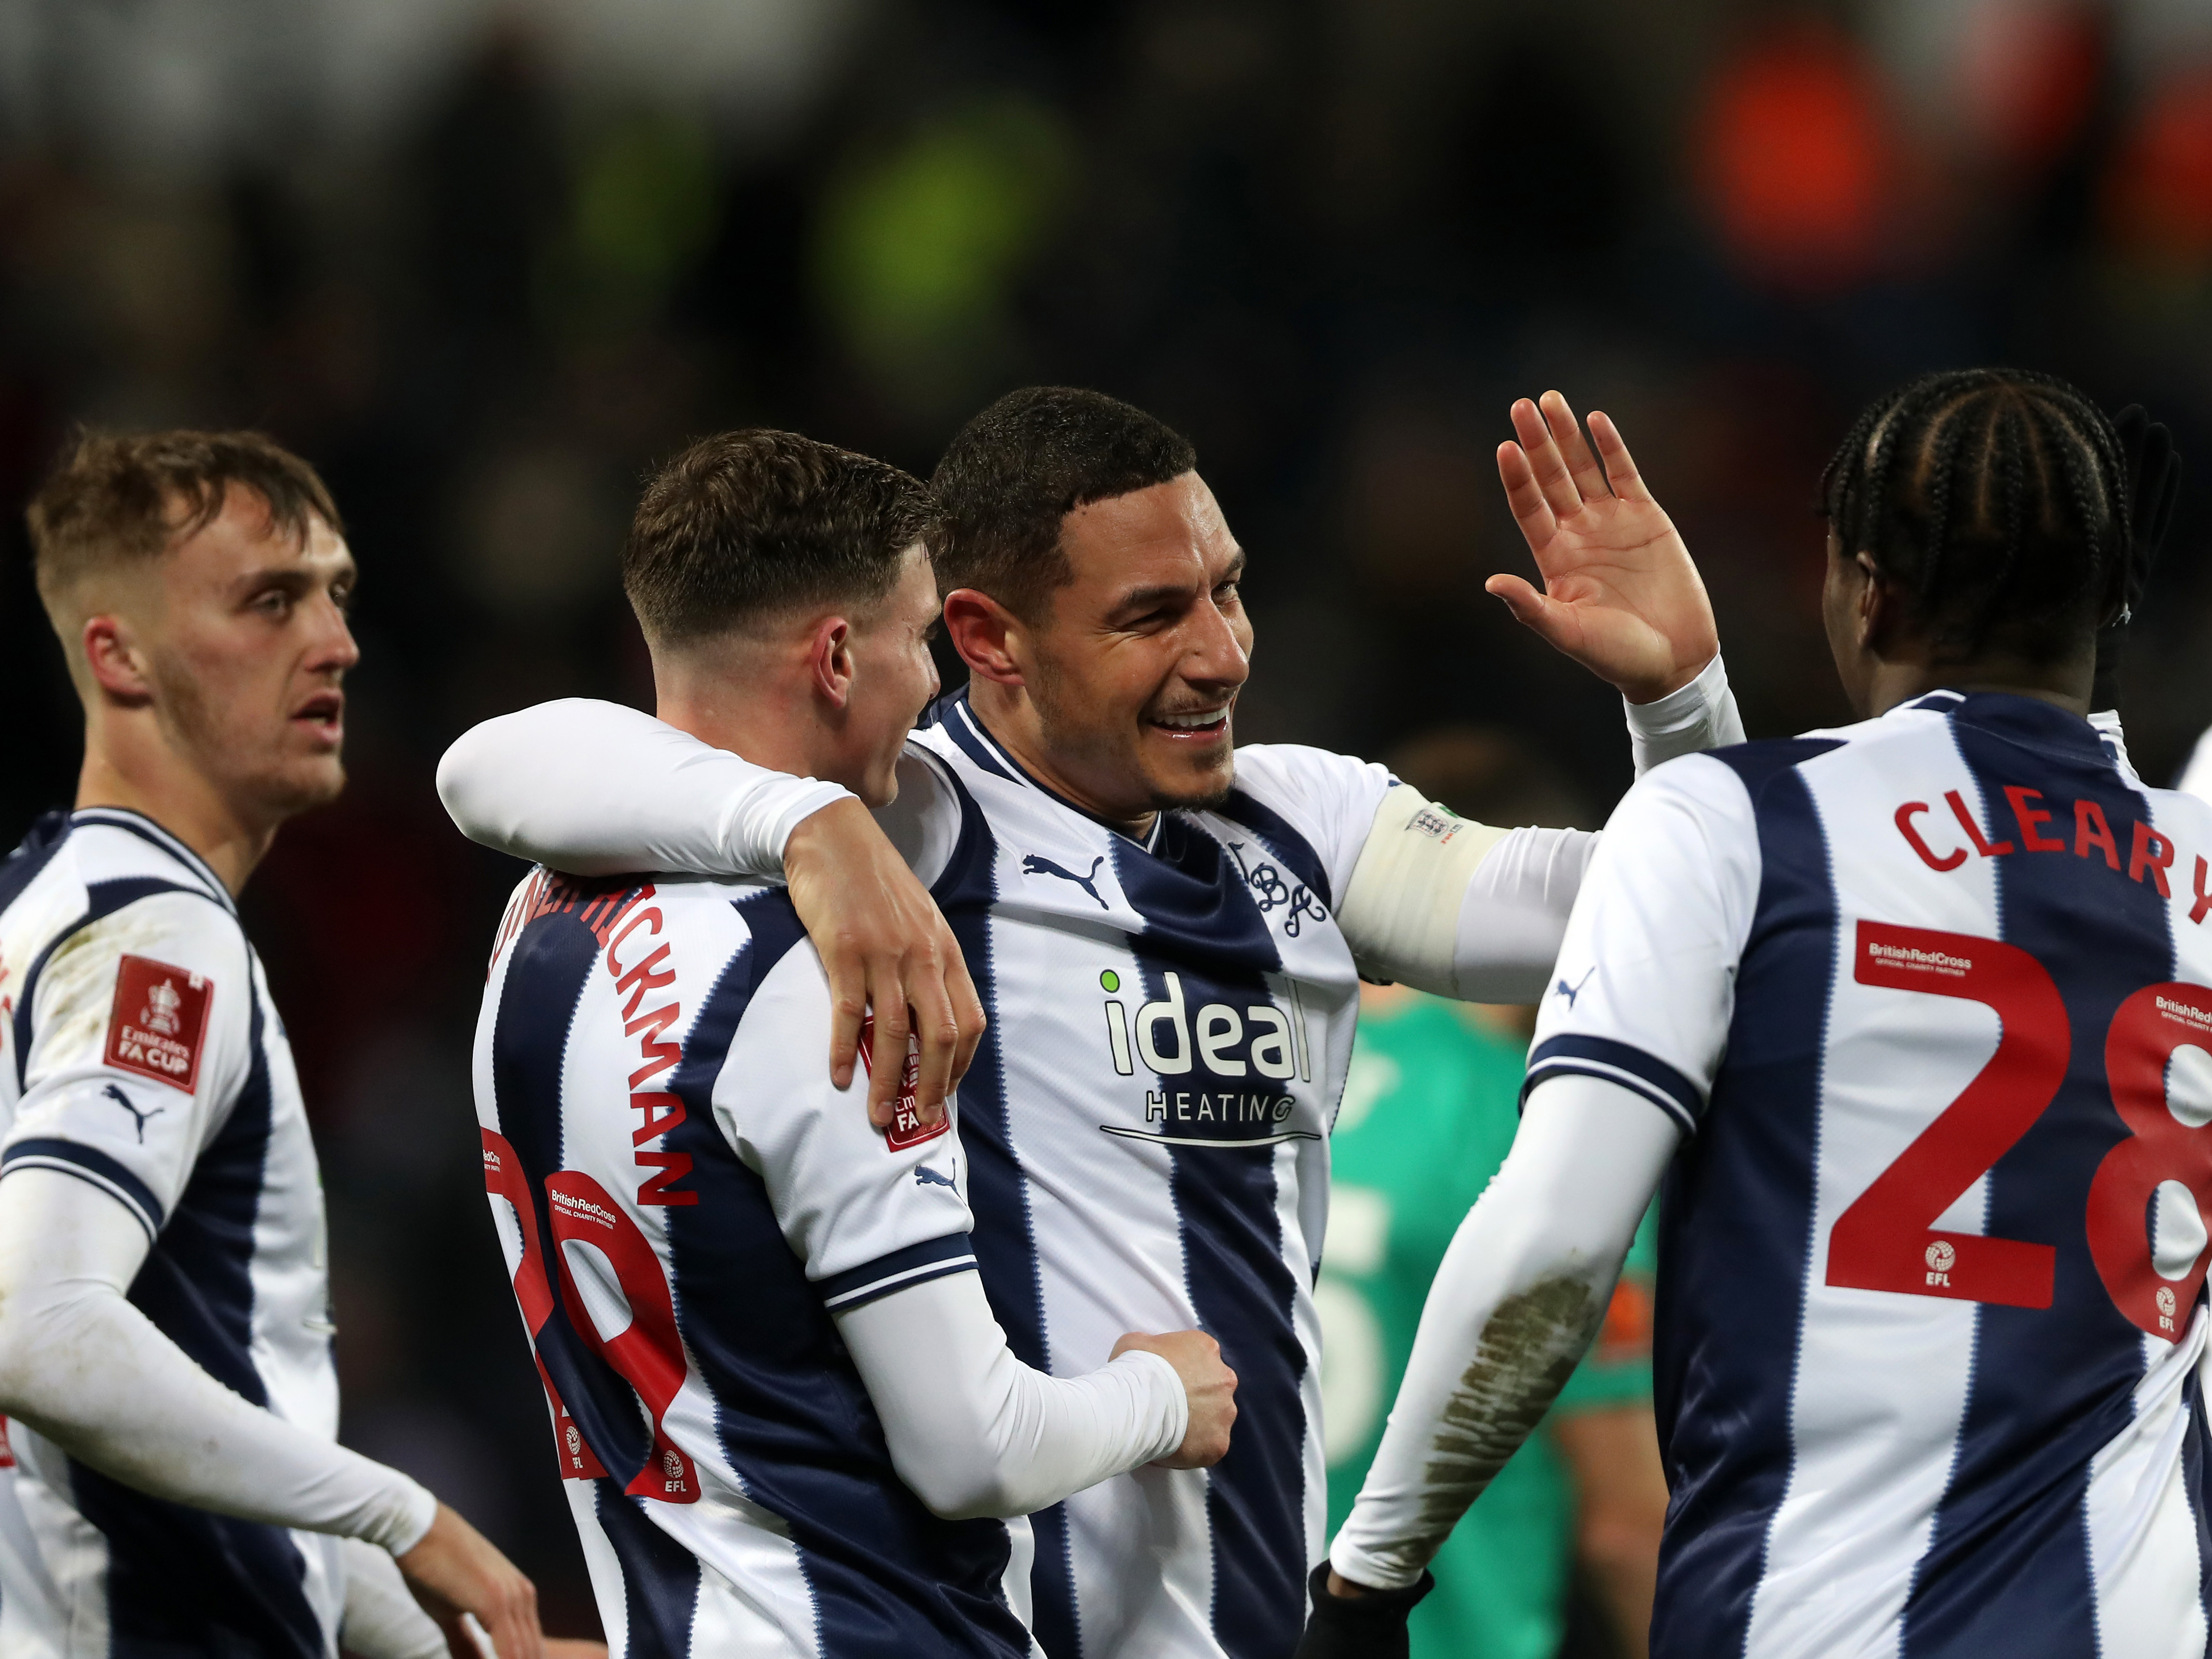 An image of Jake Livermore celebrating with his teammates after a goal against Chesterfield